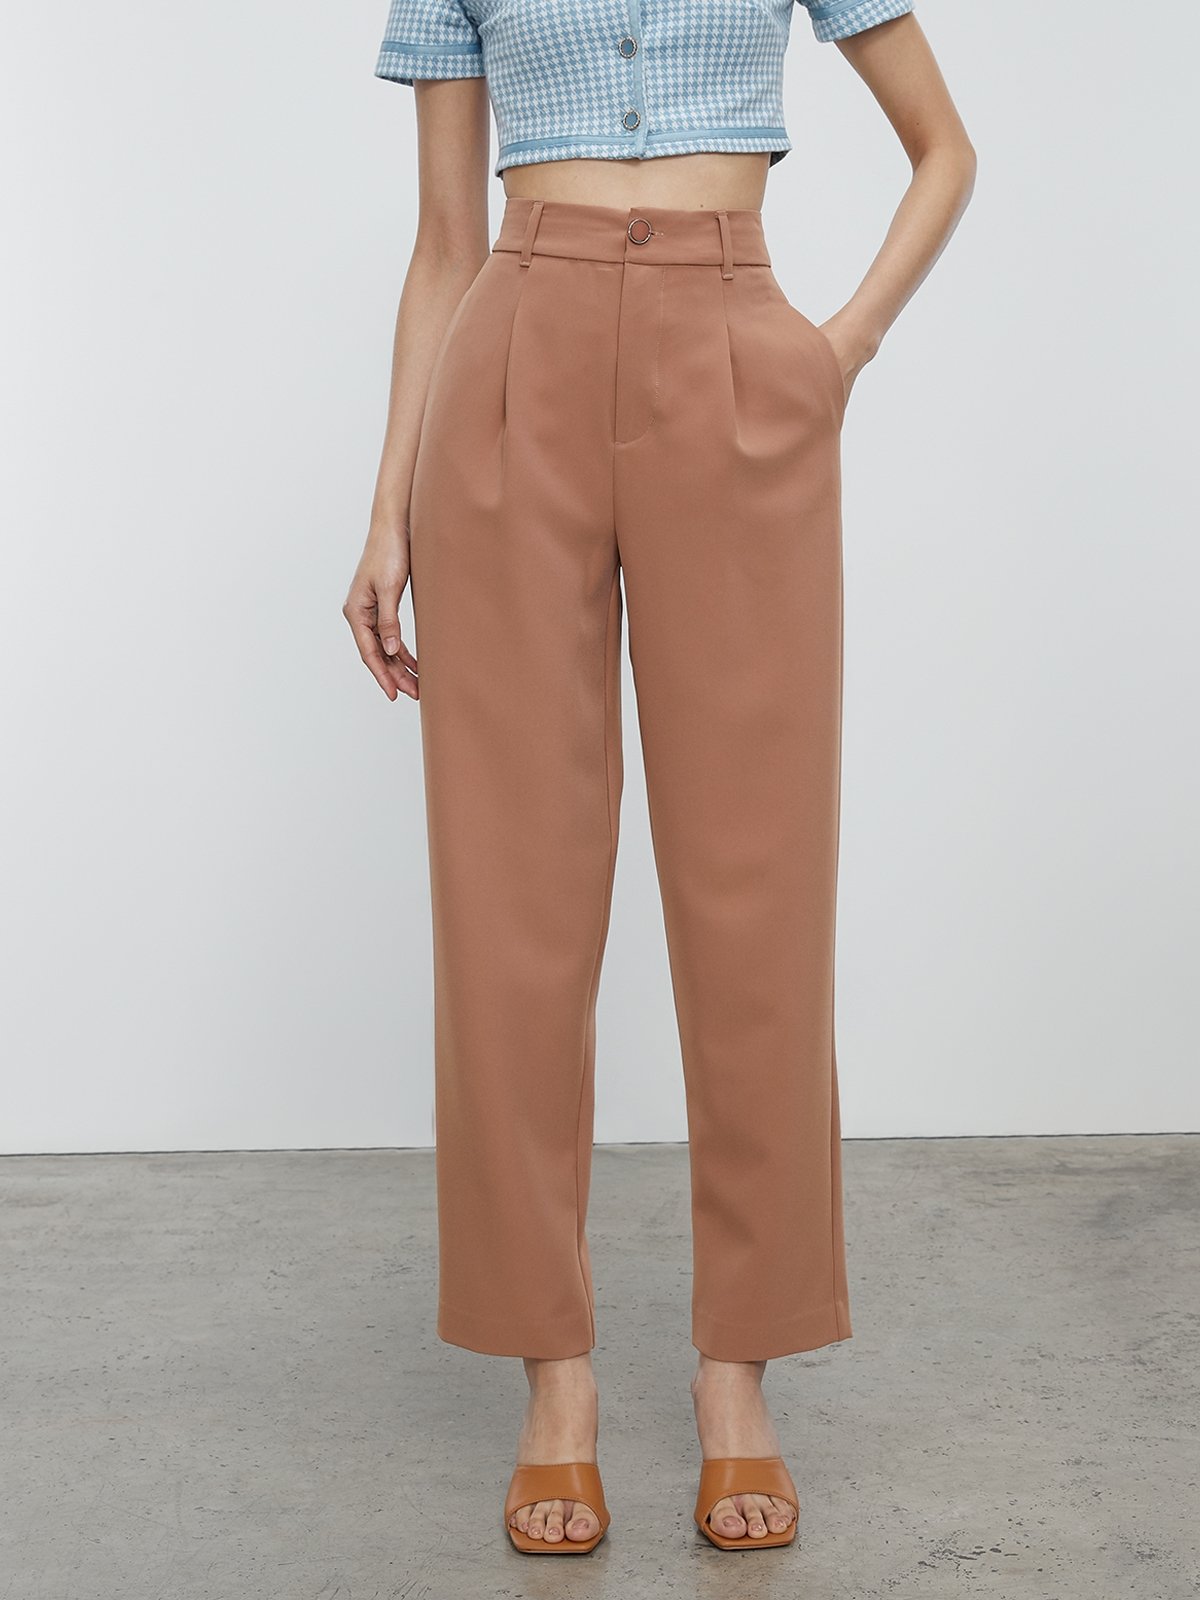 170 Best high waist trousers ideas | fashion, high waisted trousers,  trousers-anthinhphatland.vn